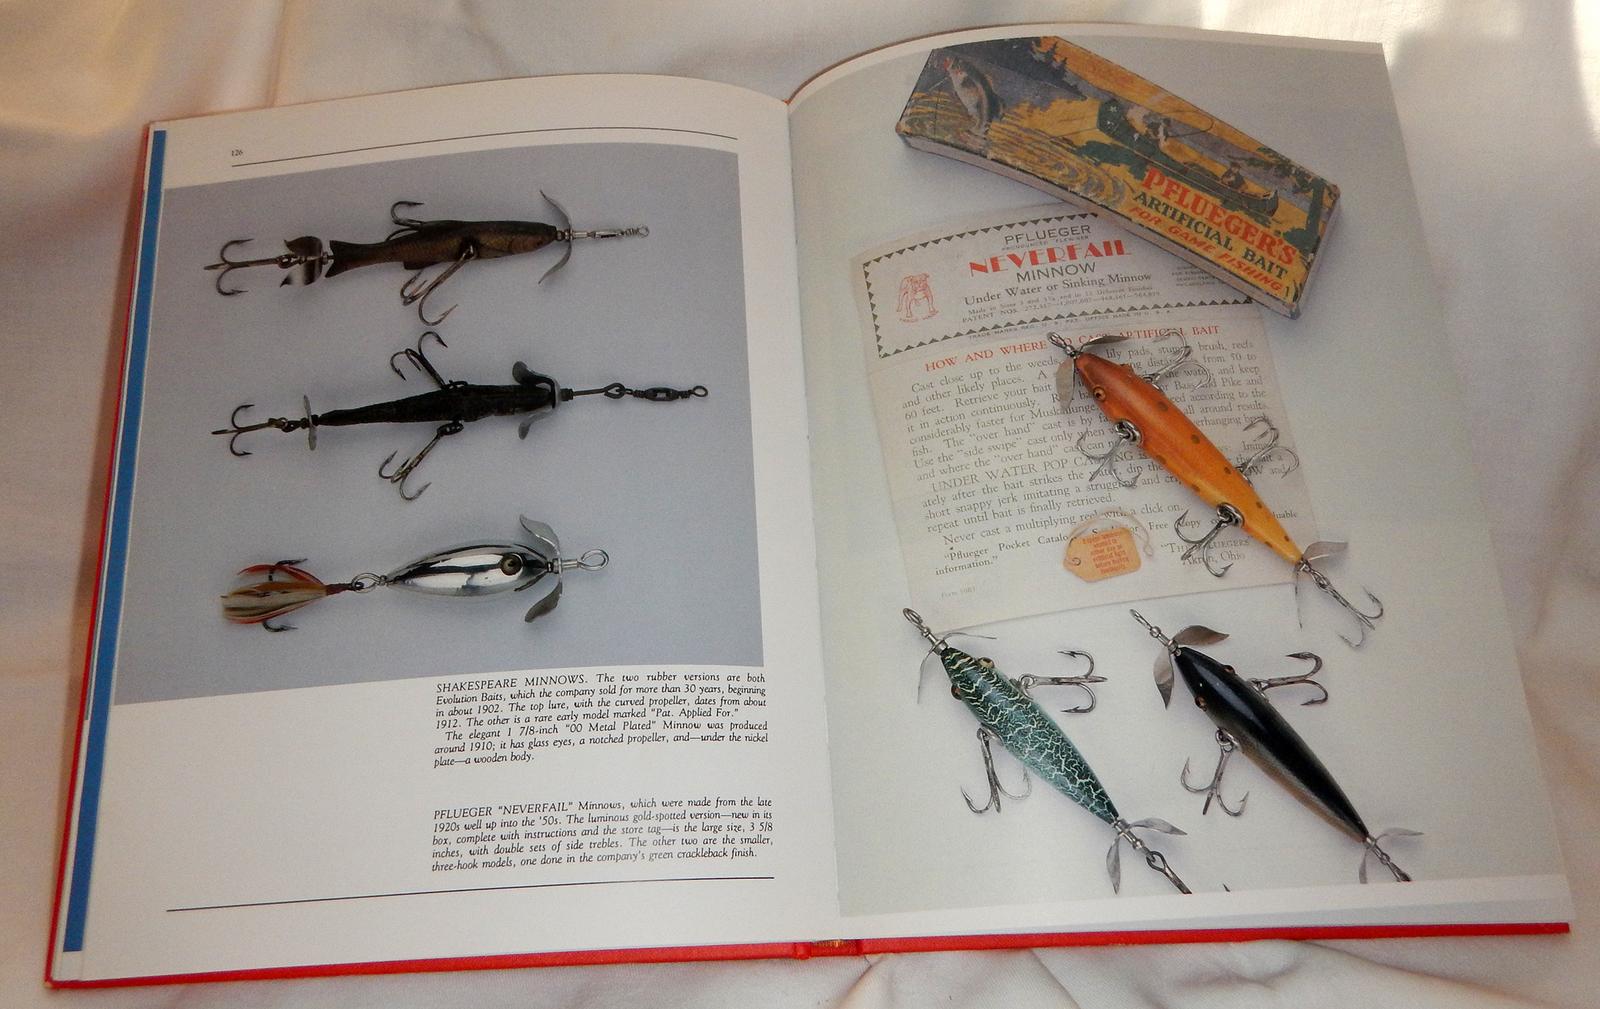 THE COLLECTORS GUIDE TO ANTIQUE FISHING TACKLE, Silvio Calabi